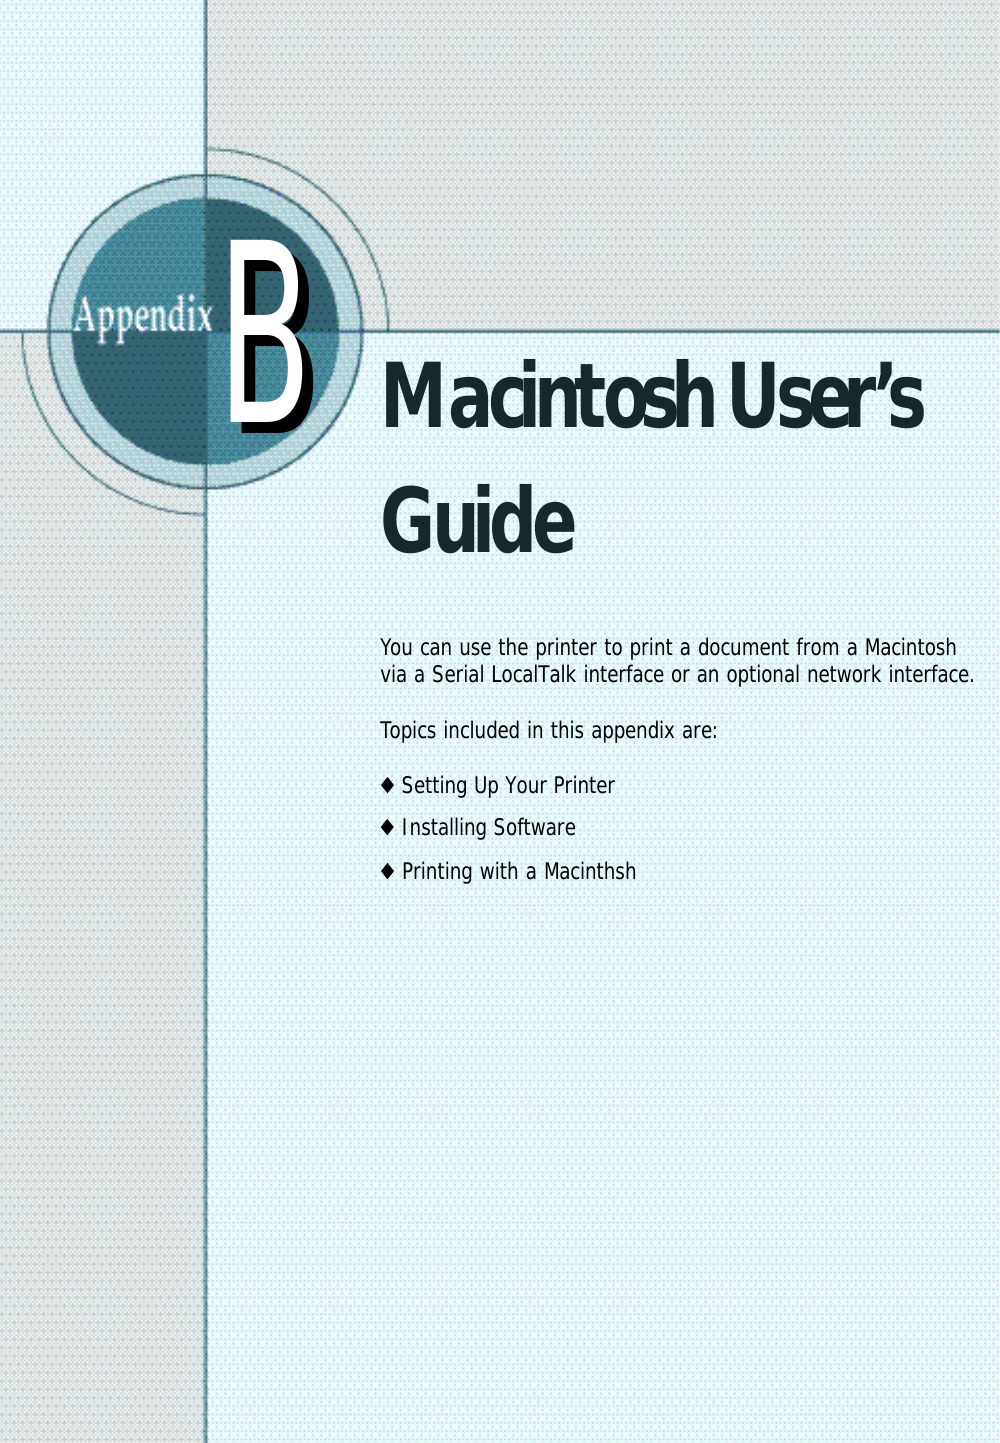 Macintosh User’sG u i d eYou can use the printer to print a document from a Macintosh via a Serial LocalTalk interface or an optional network interface. Topics included in this appendix are:◆Setting Up Your Printer◆Installing Software◆Printing with a MacinthshBB